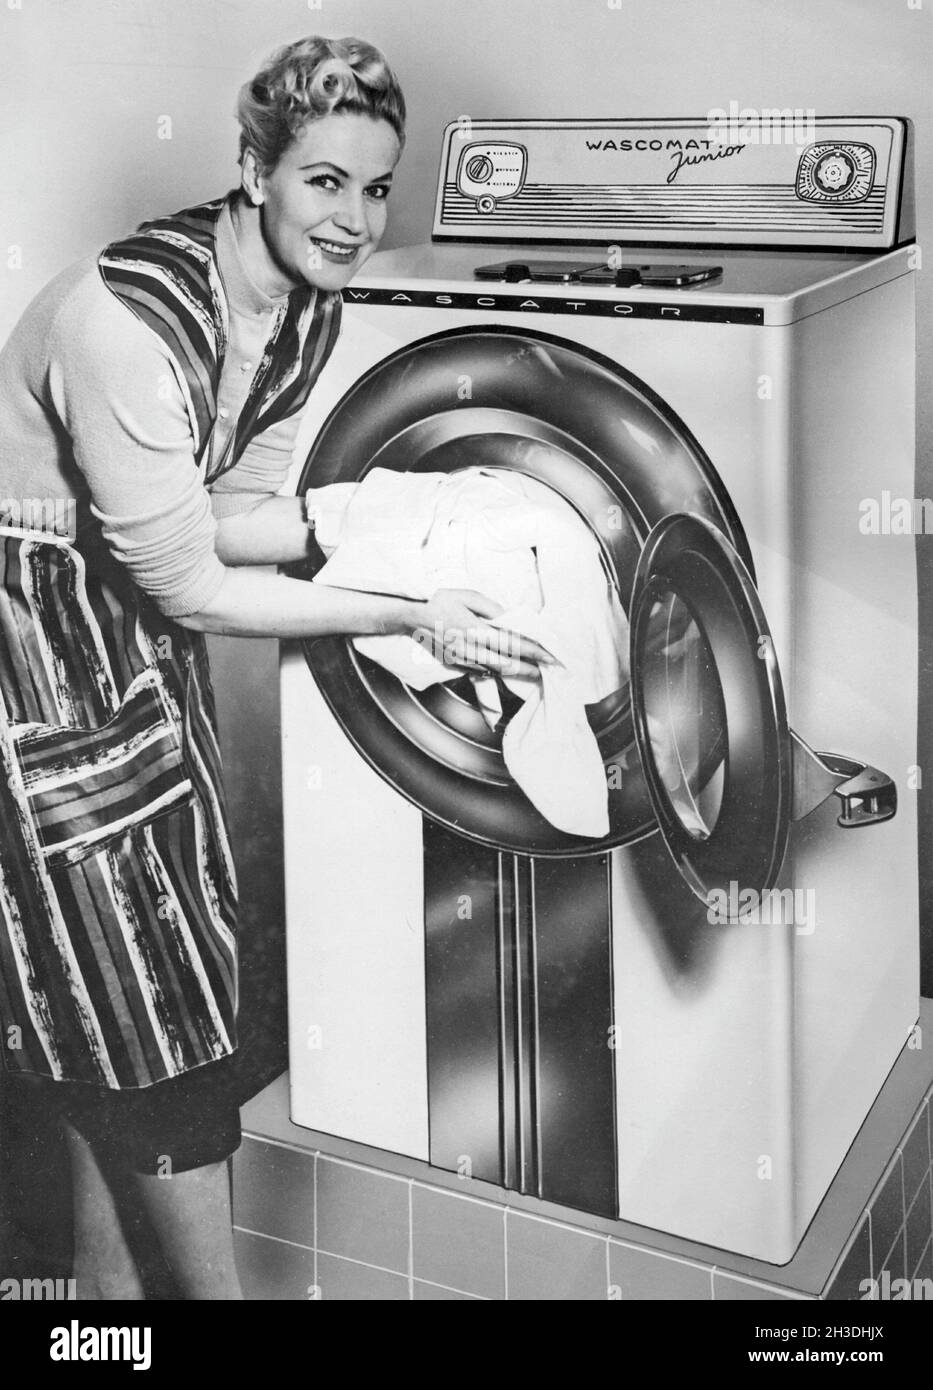 Doing the laundry in the 1950s. A lady is demonstrating the new washingmachine Wasc-O-Mat Junior manufactured by AB Wascator. Stock Photo